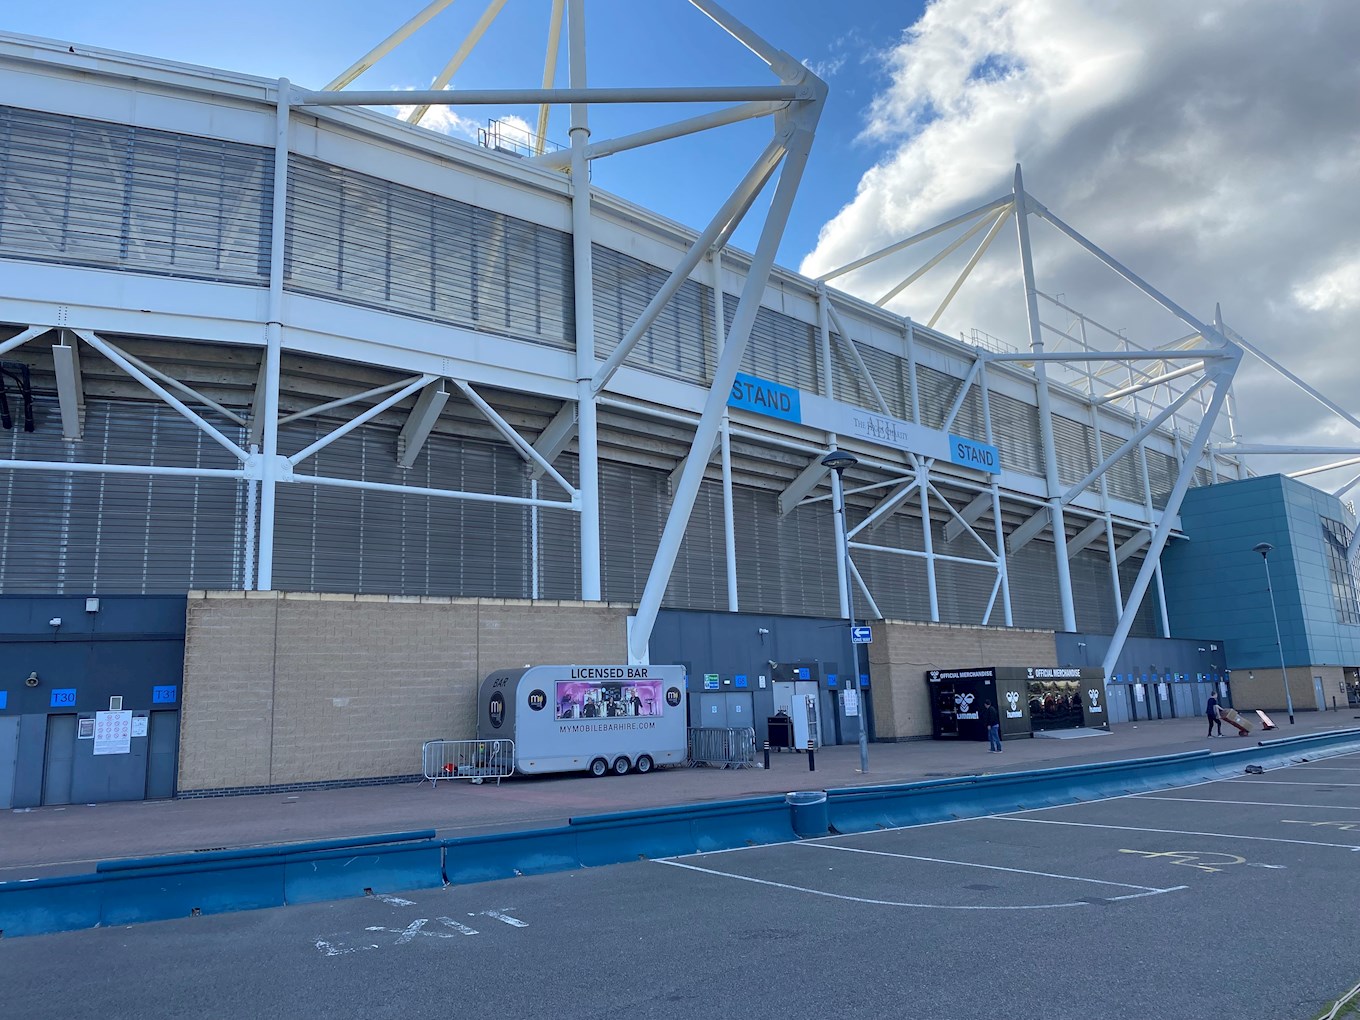 How to buy tickets - Coventry City